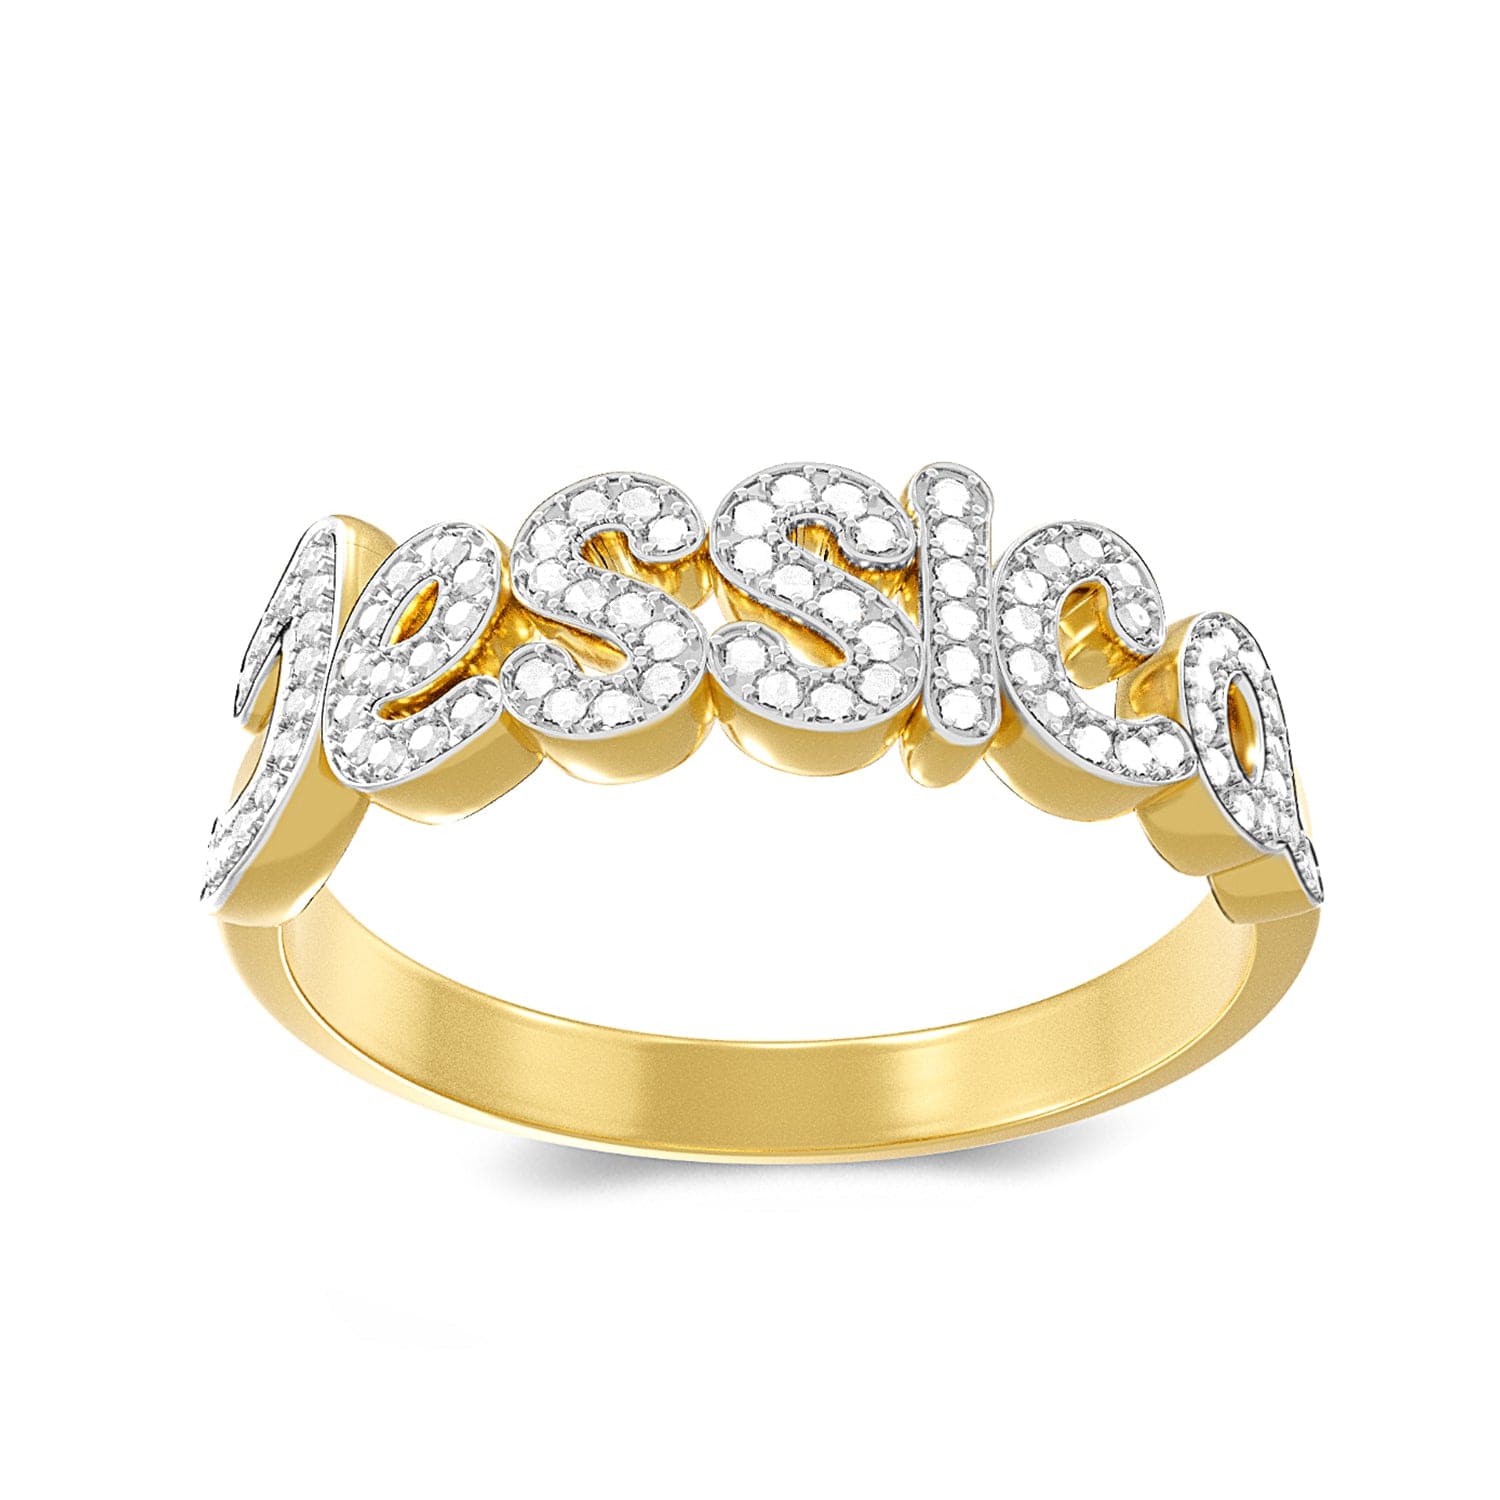 Two-Tone. Sterling Silver Script Name Ring with Cubic Zirconia Stones